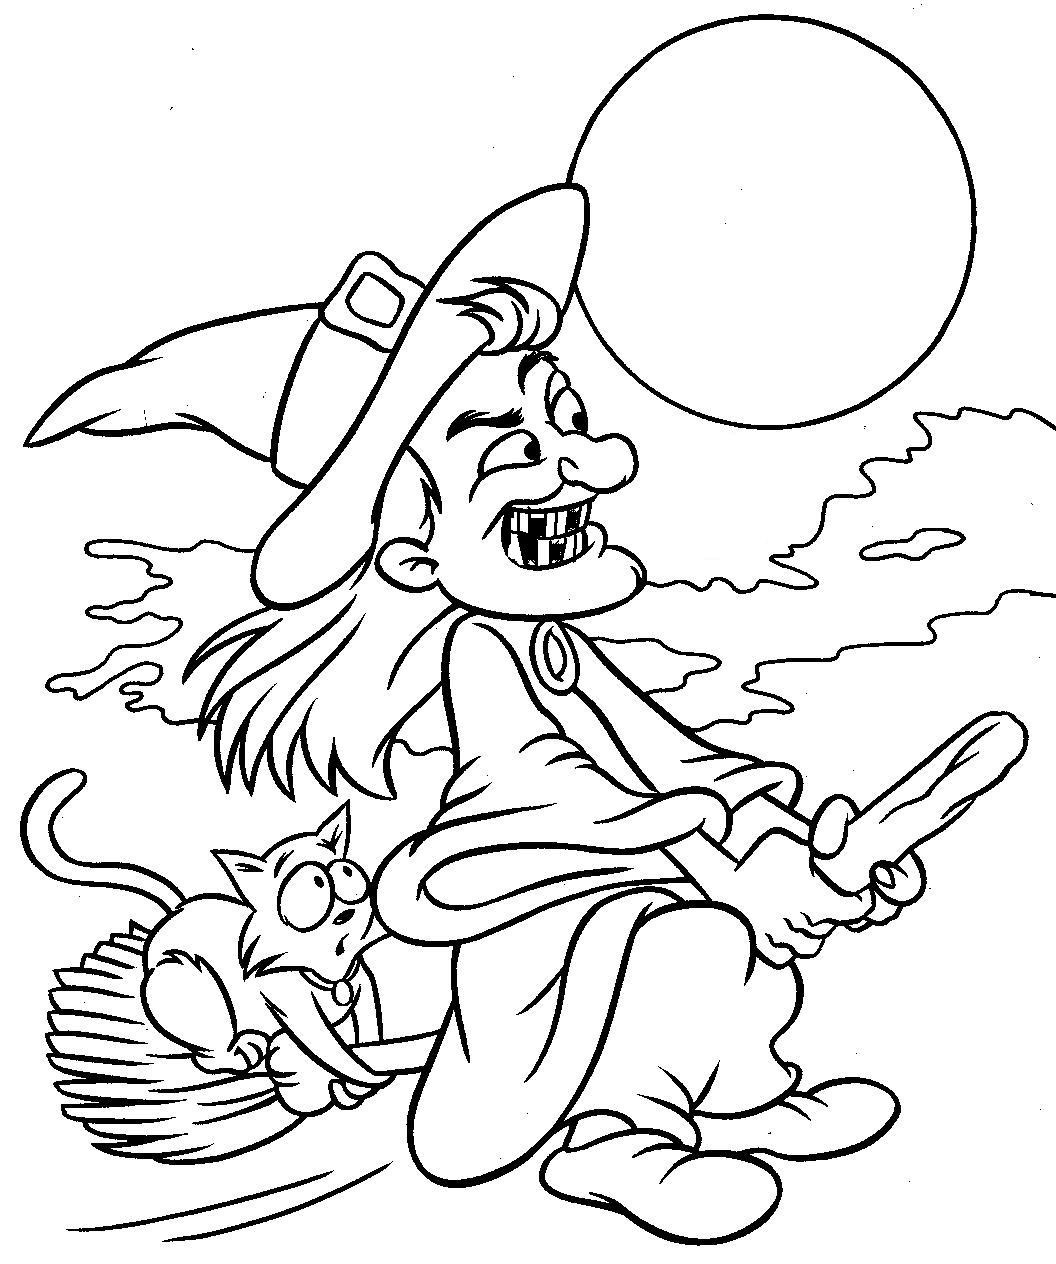 Printable Halloween Coloring Pages For Kids
 Free Halloween coloring pages Halloween Coloring Pages